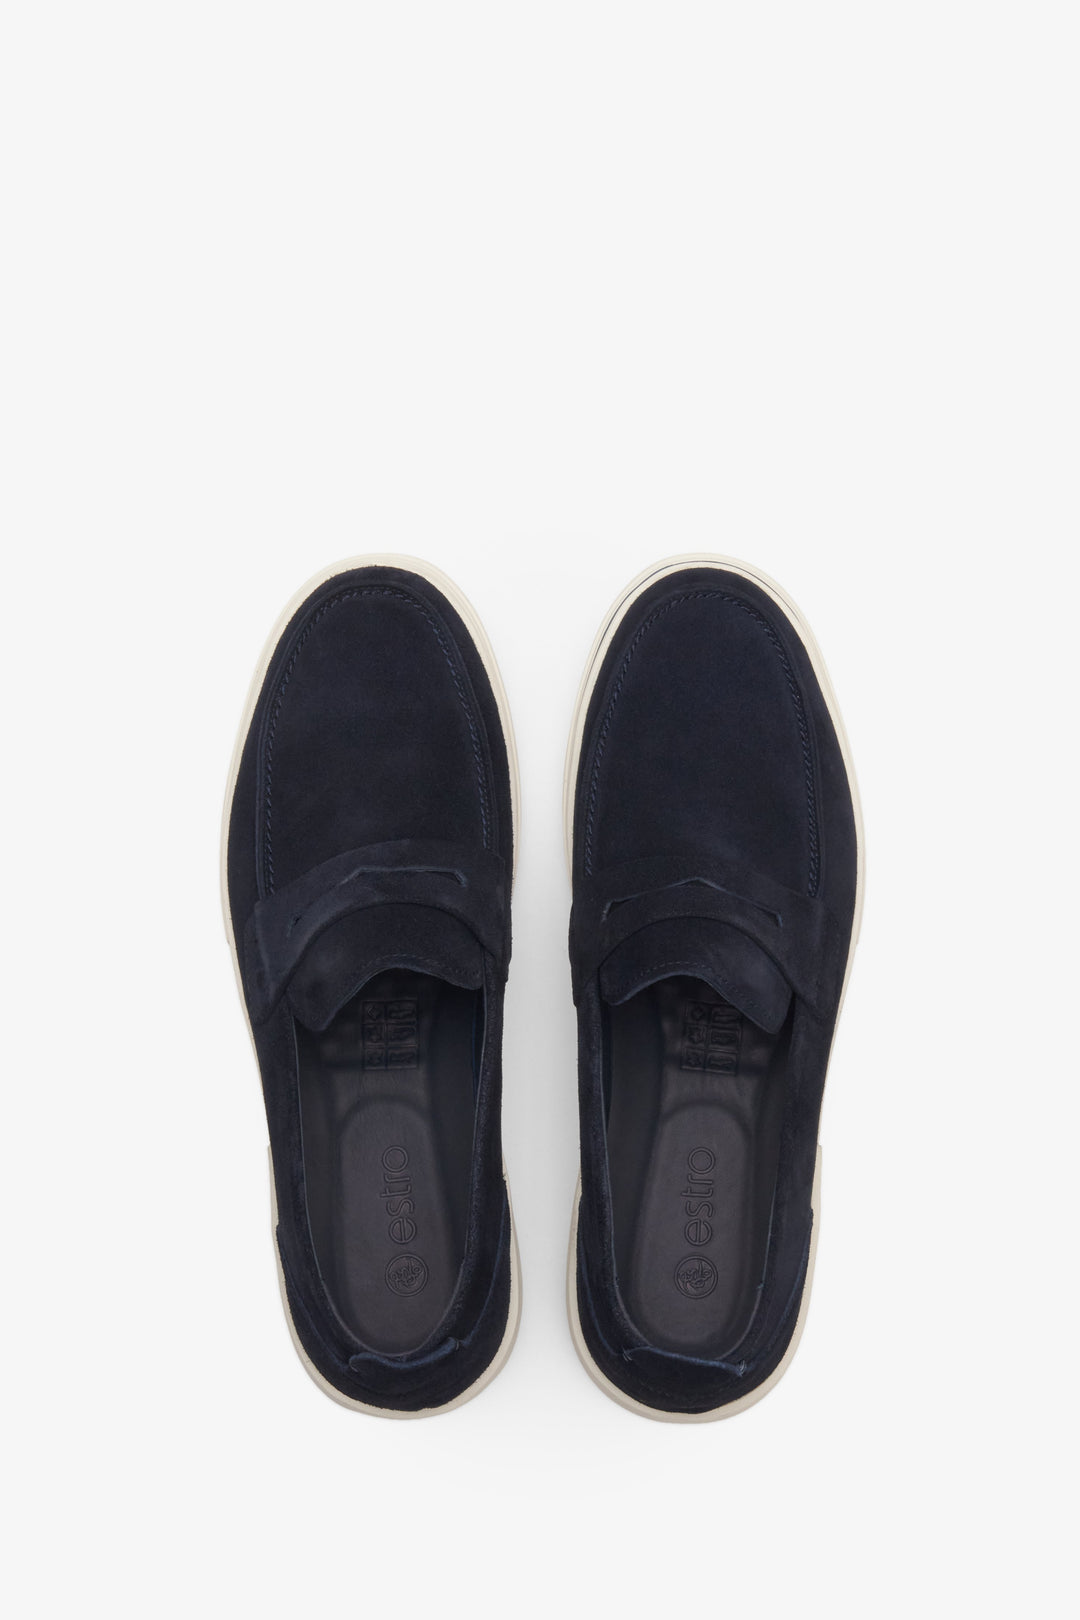 Men's spring and fall velour loafers - top view shoe presentation.